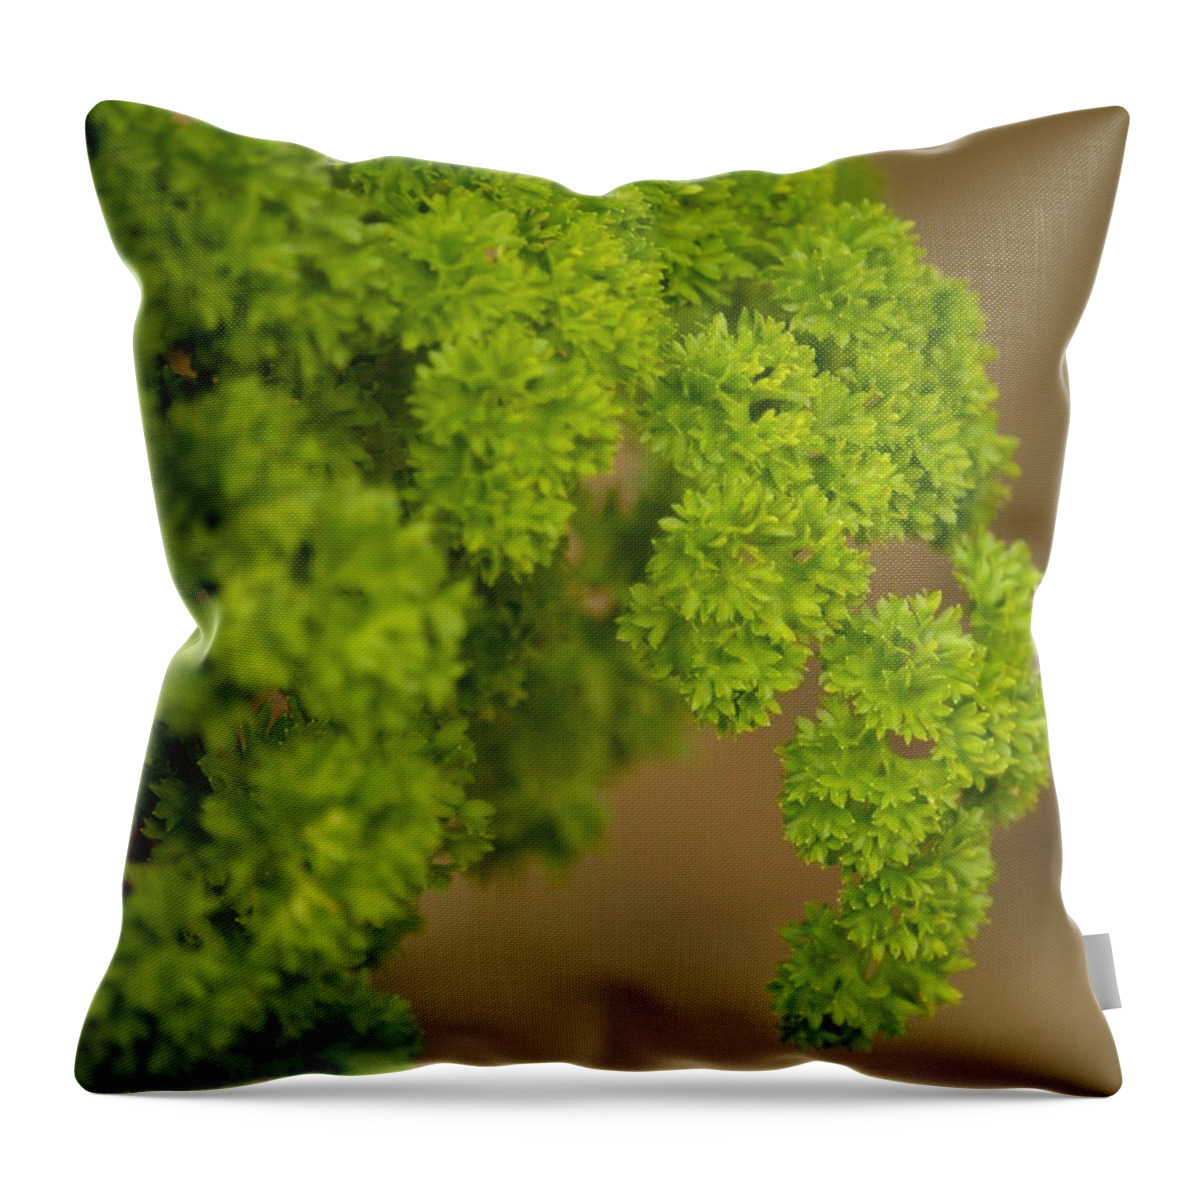 Overwintered Parsley Throw Pillow featuring the photograph Overwintered Parsley by Maria Urso